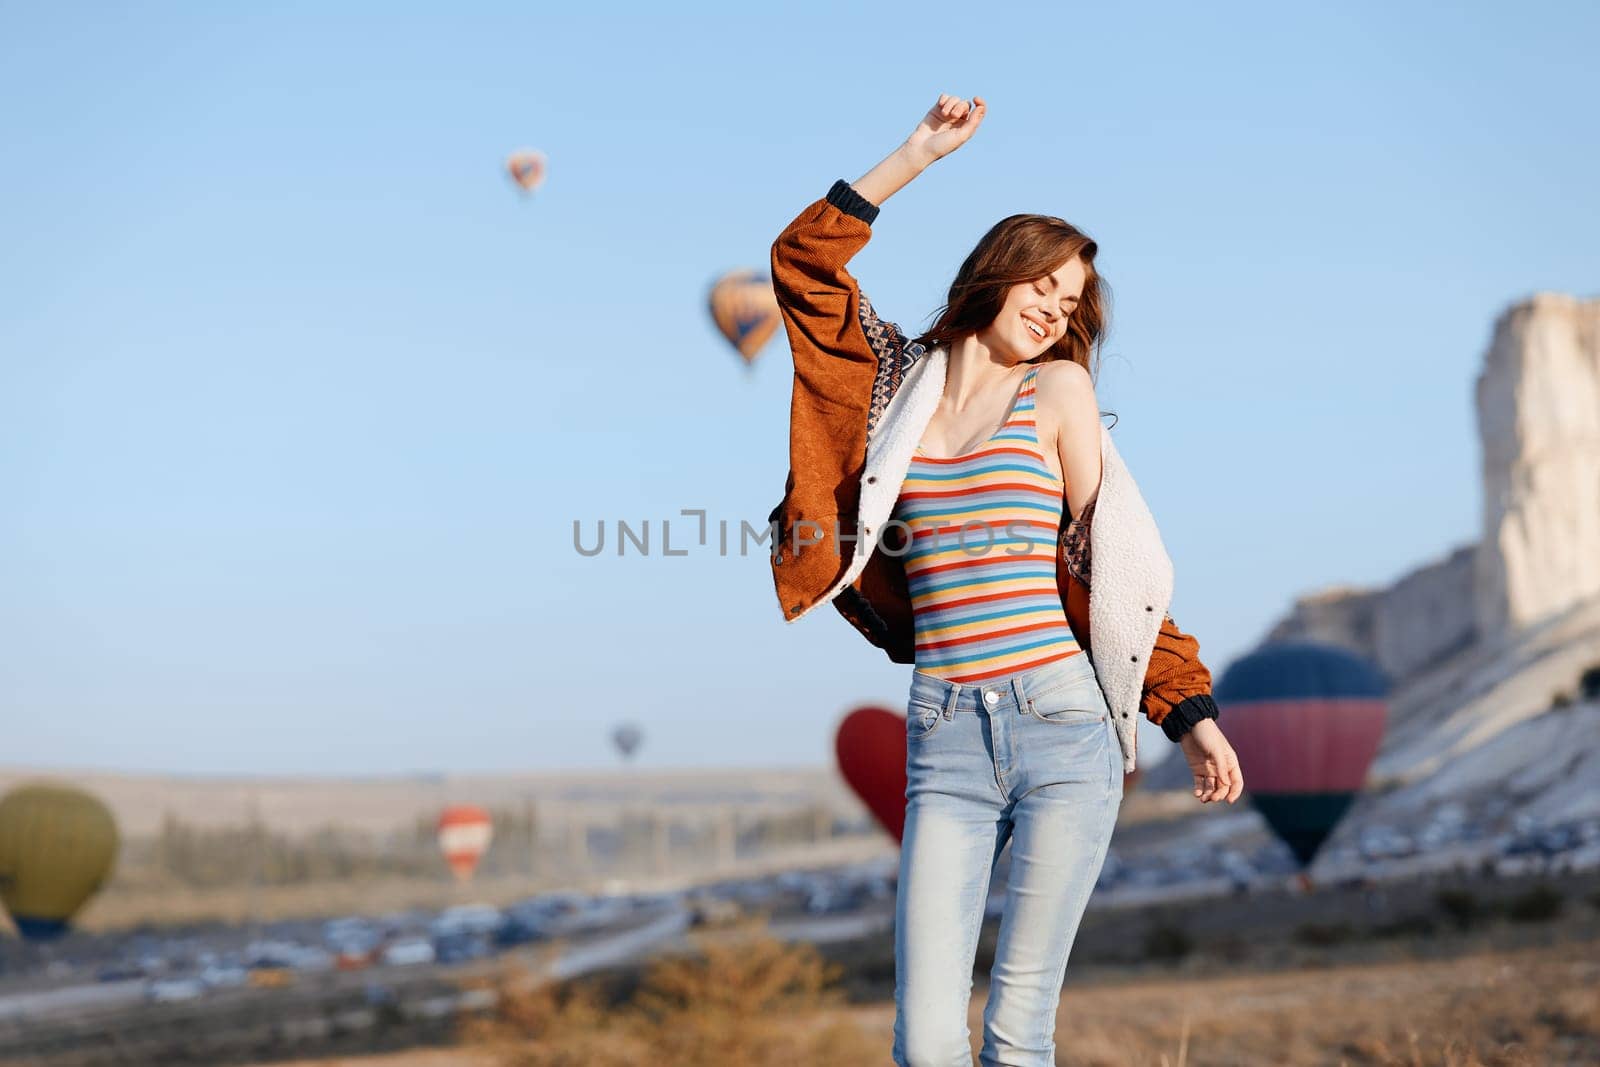 joyful woman leaping with striped shirt as colorful hot air balloons float in the sky by Vichizh